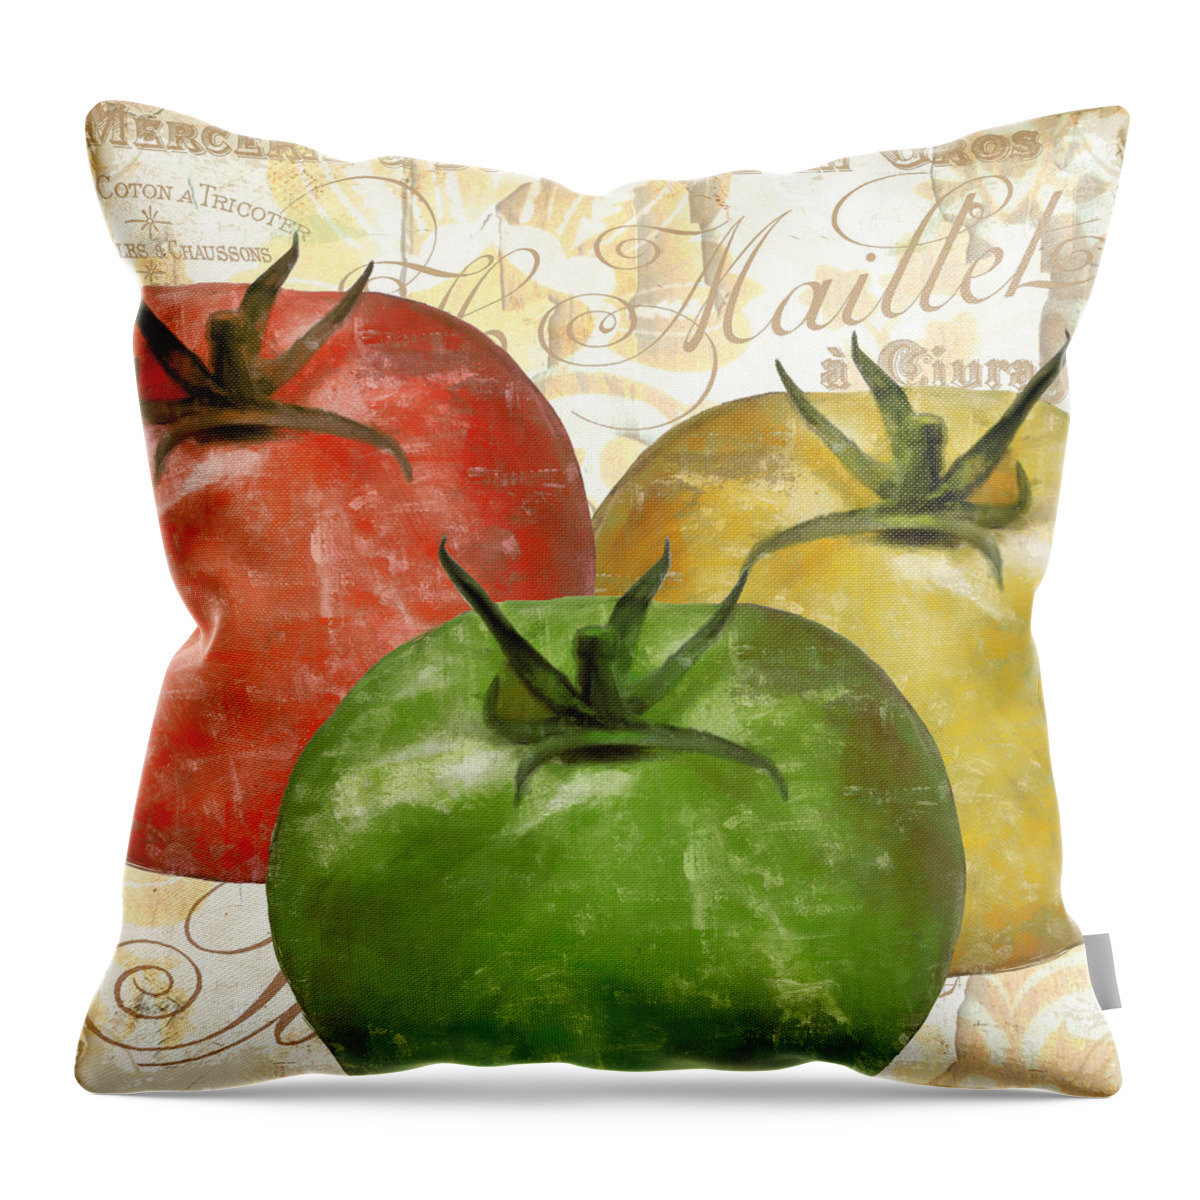 Tomato Throw Pillow featuring the painting Tomatoes Tomates by Mindy Sommers